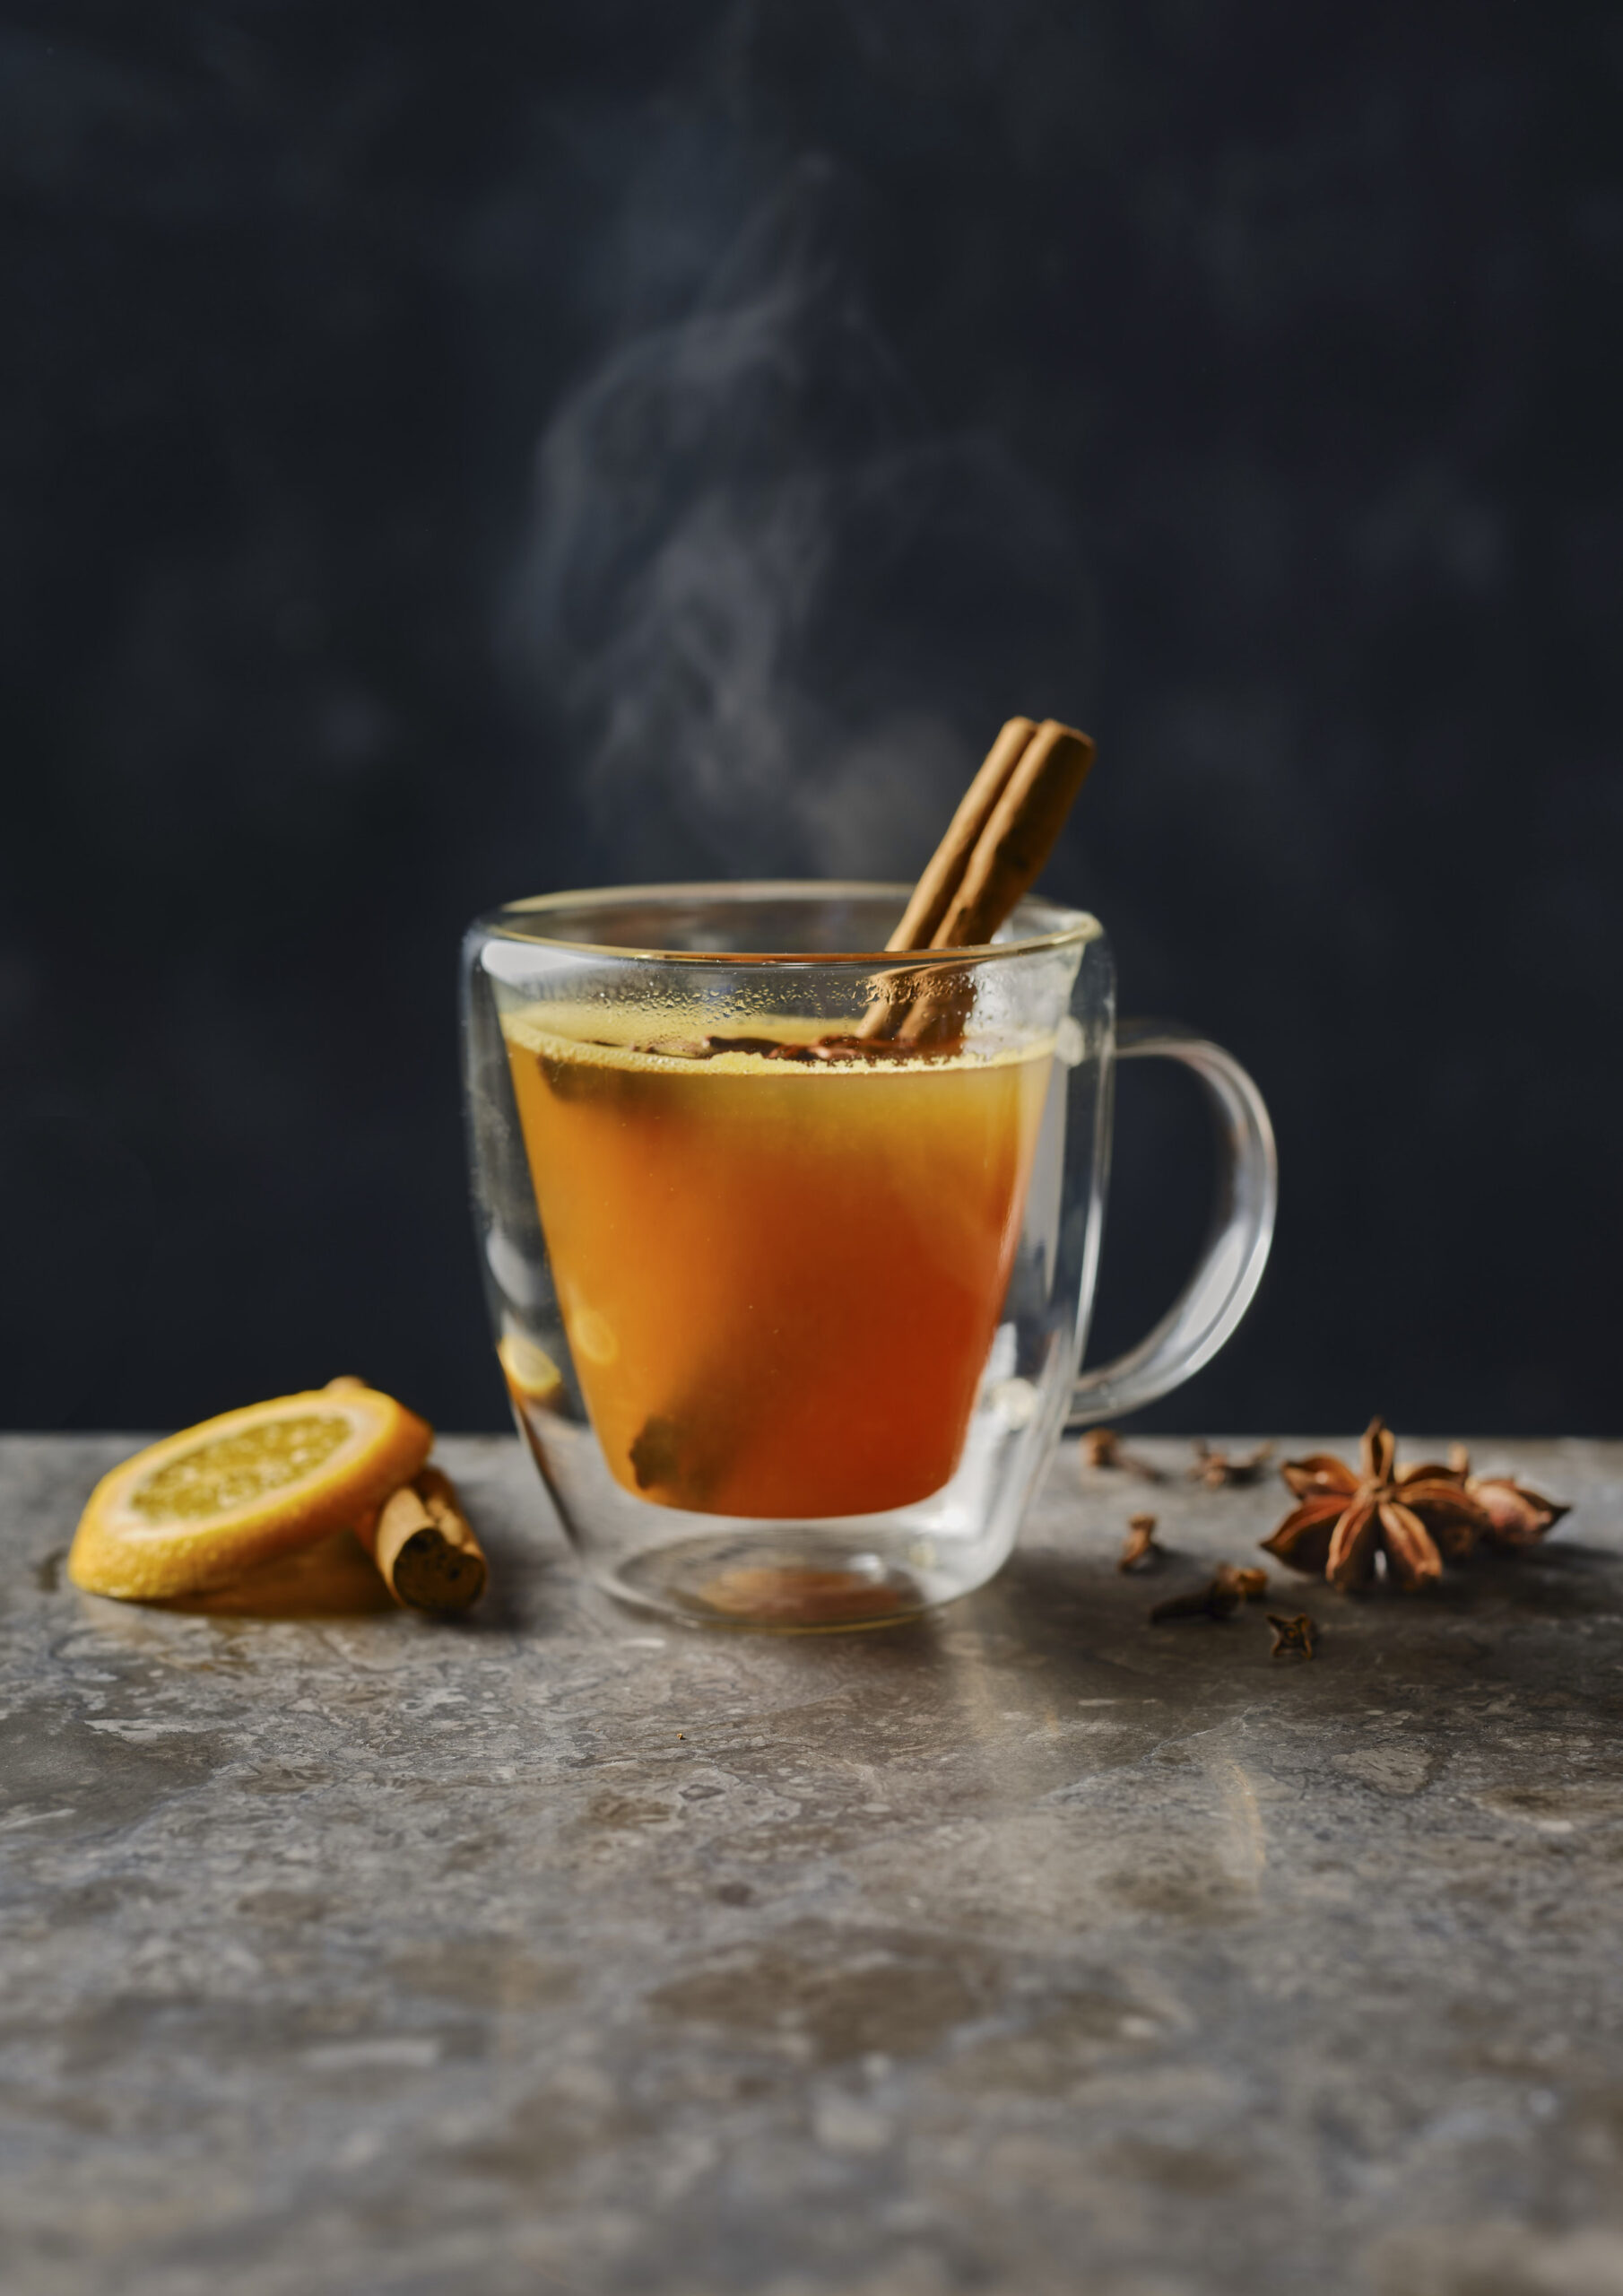 At The Kitchen | Mulled Cider